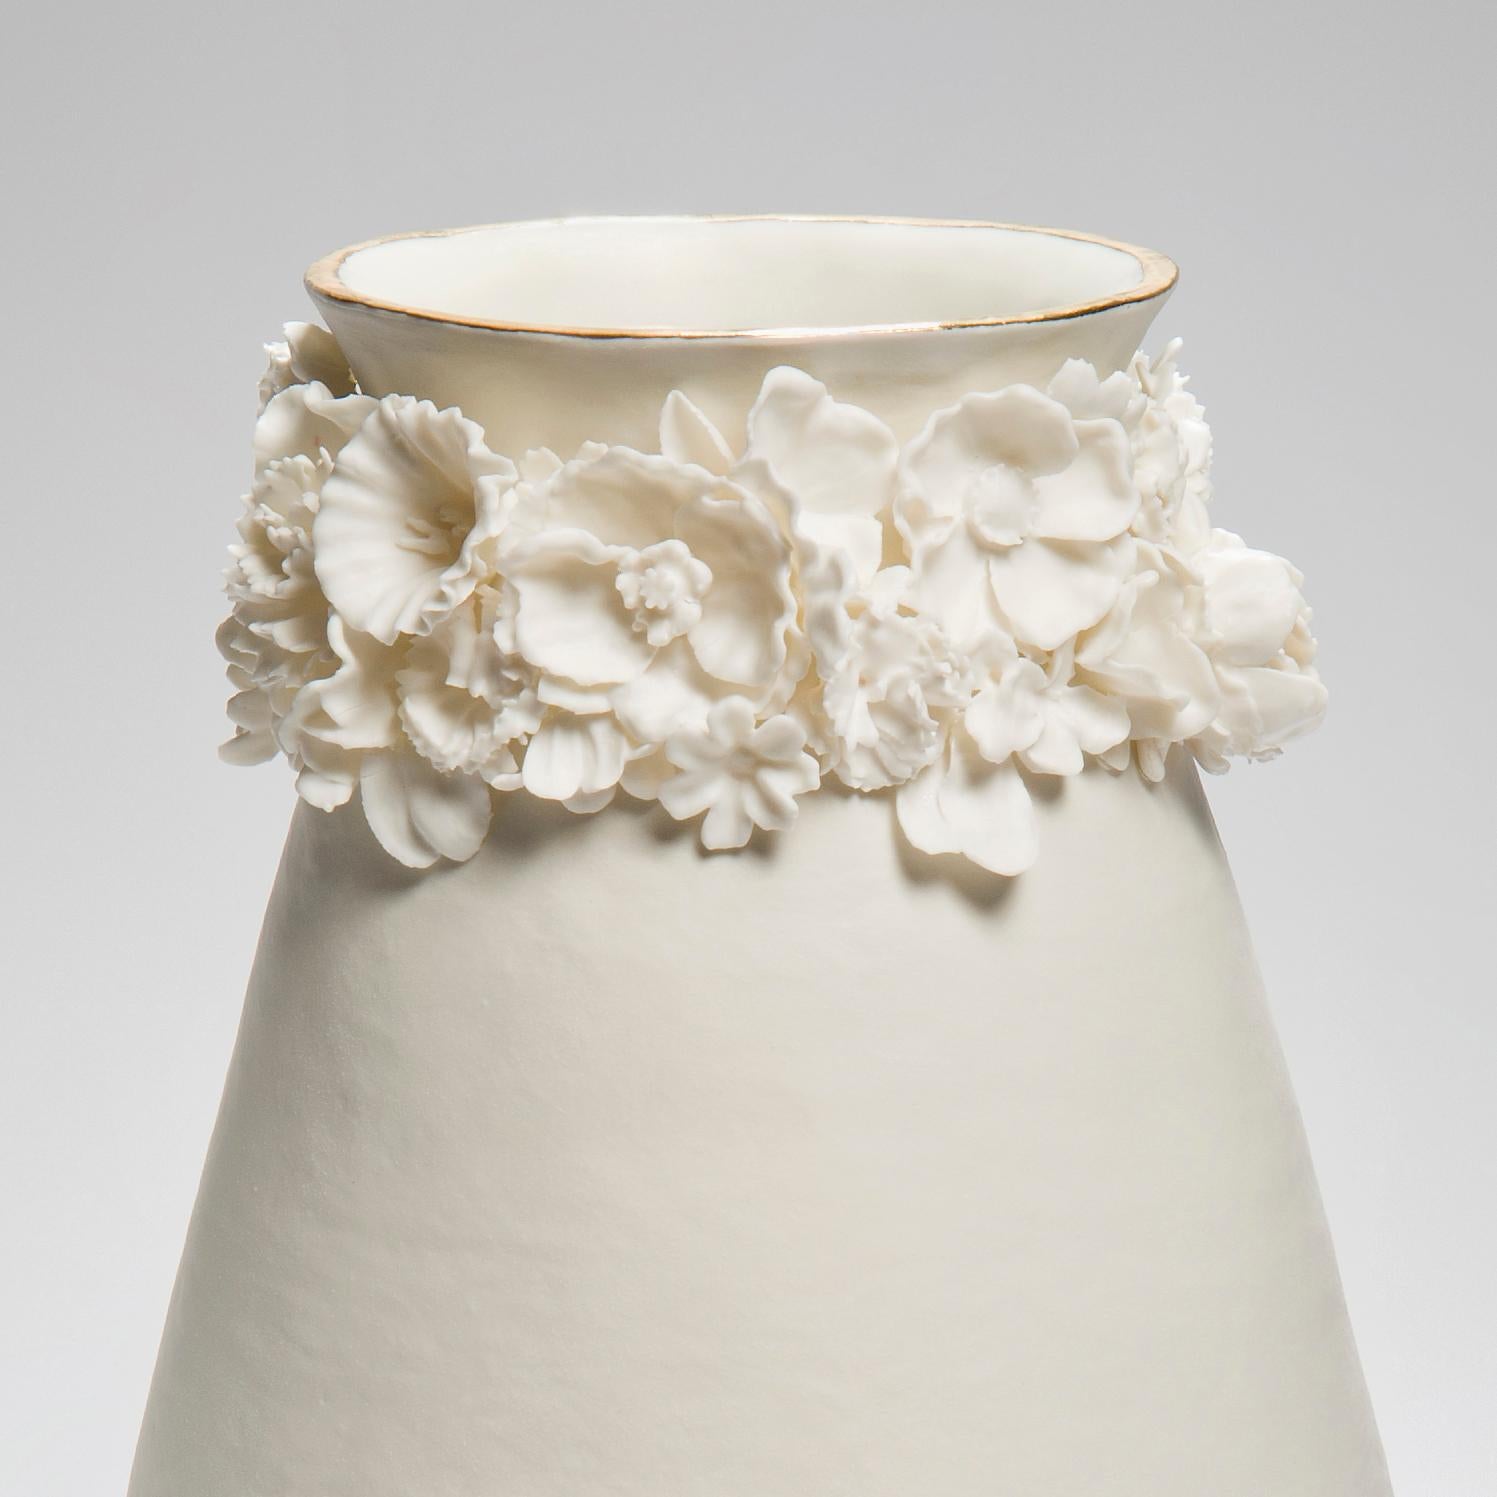 British Forget Me Not Tall Vase in Porcelain and Gold, Floral Artwork by Amy Hughes